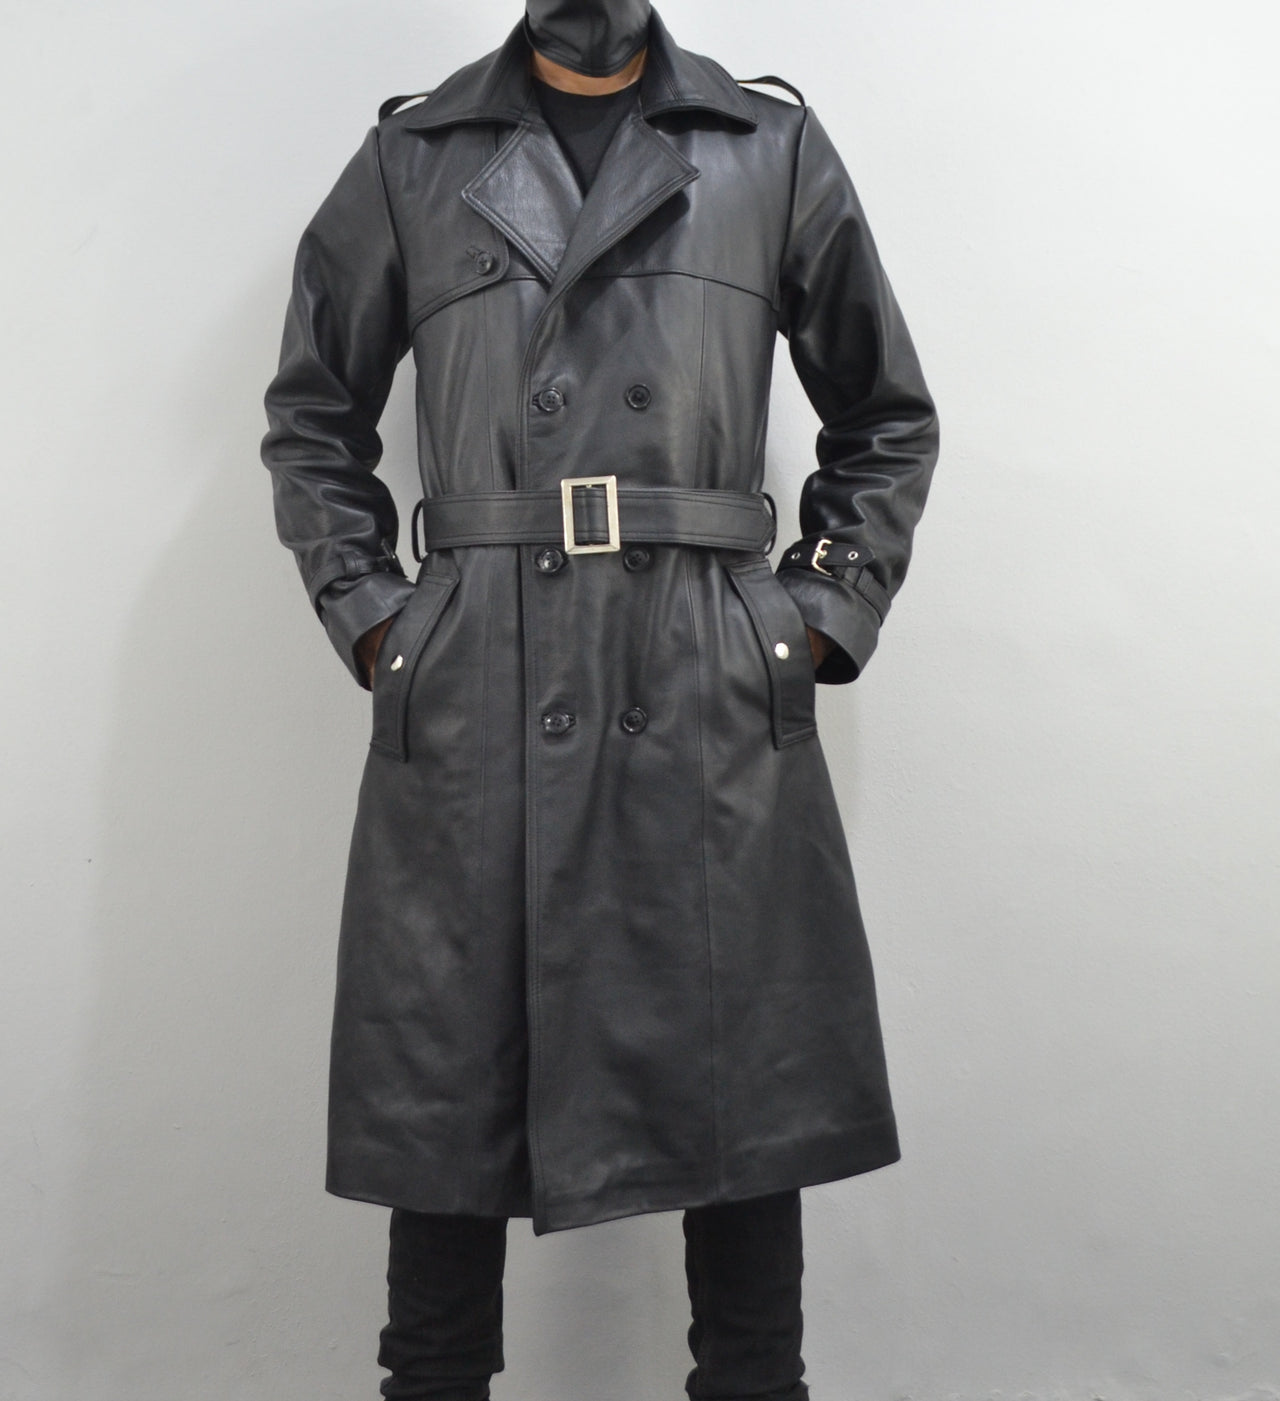 Men's Classic Belted Single Breasted Black Genuine Leather Trench Coat